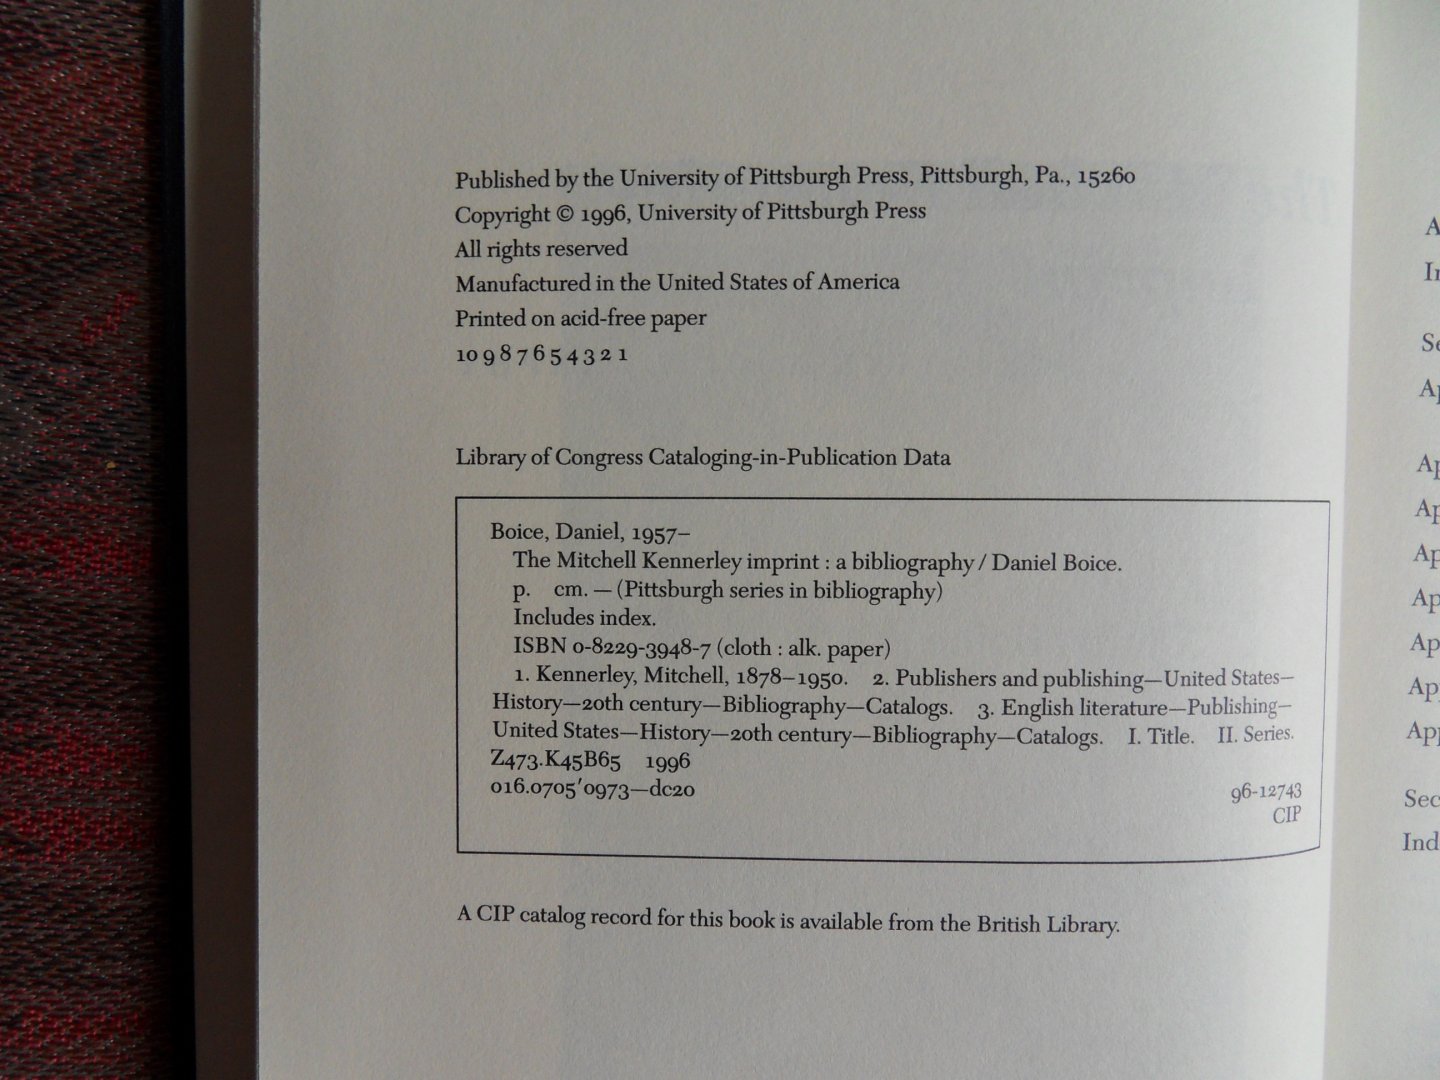 Boice, Daniel. - The Mitchell Kennerley Imprint. - In the Pittsburgh Series in Bibliography.